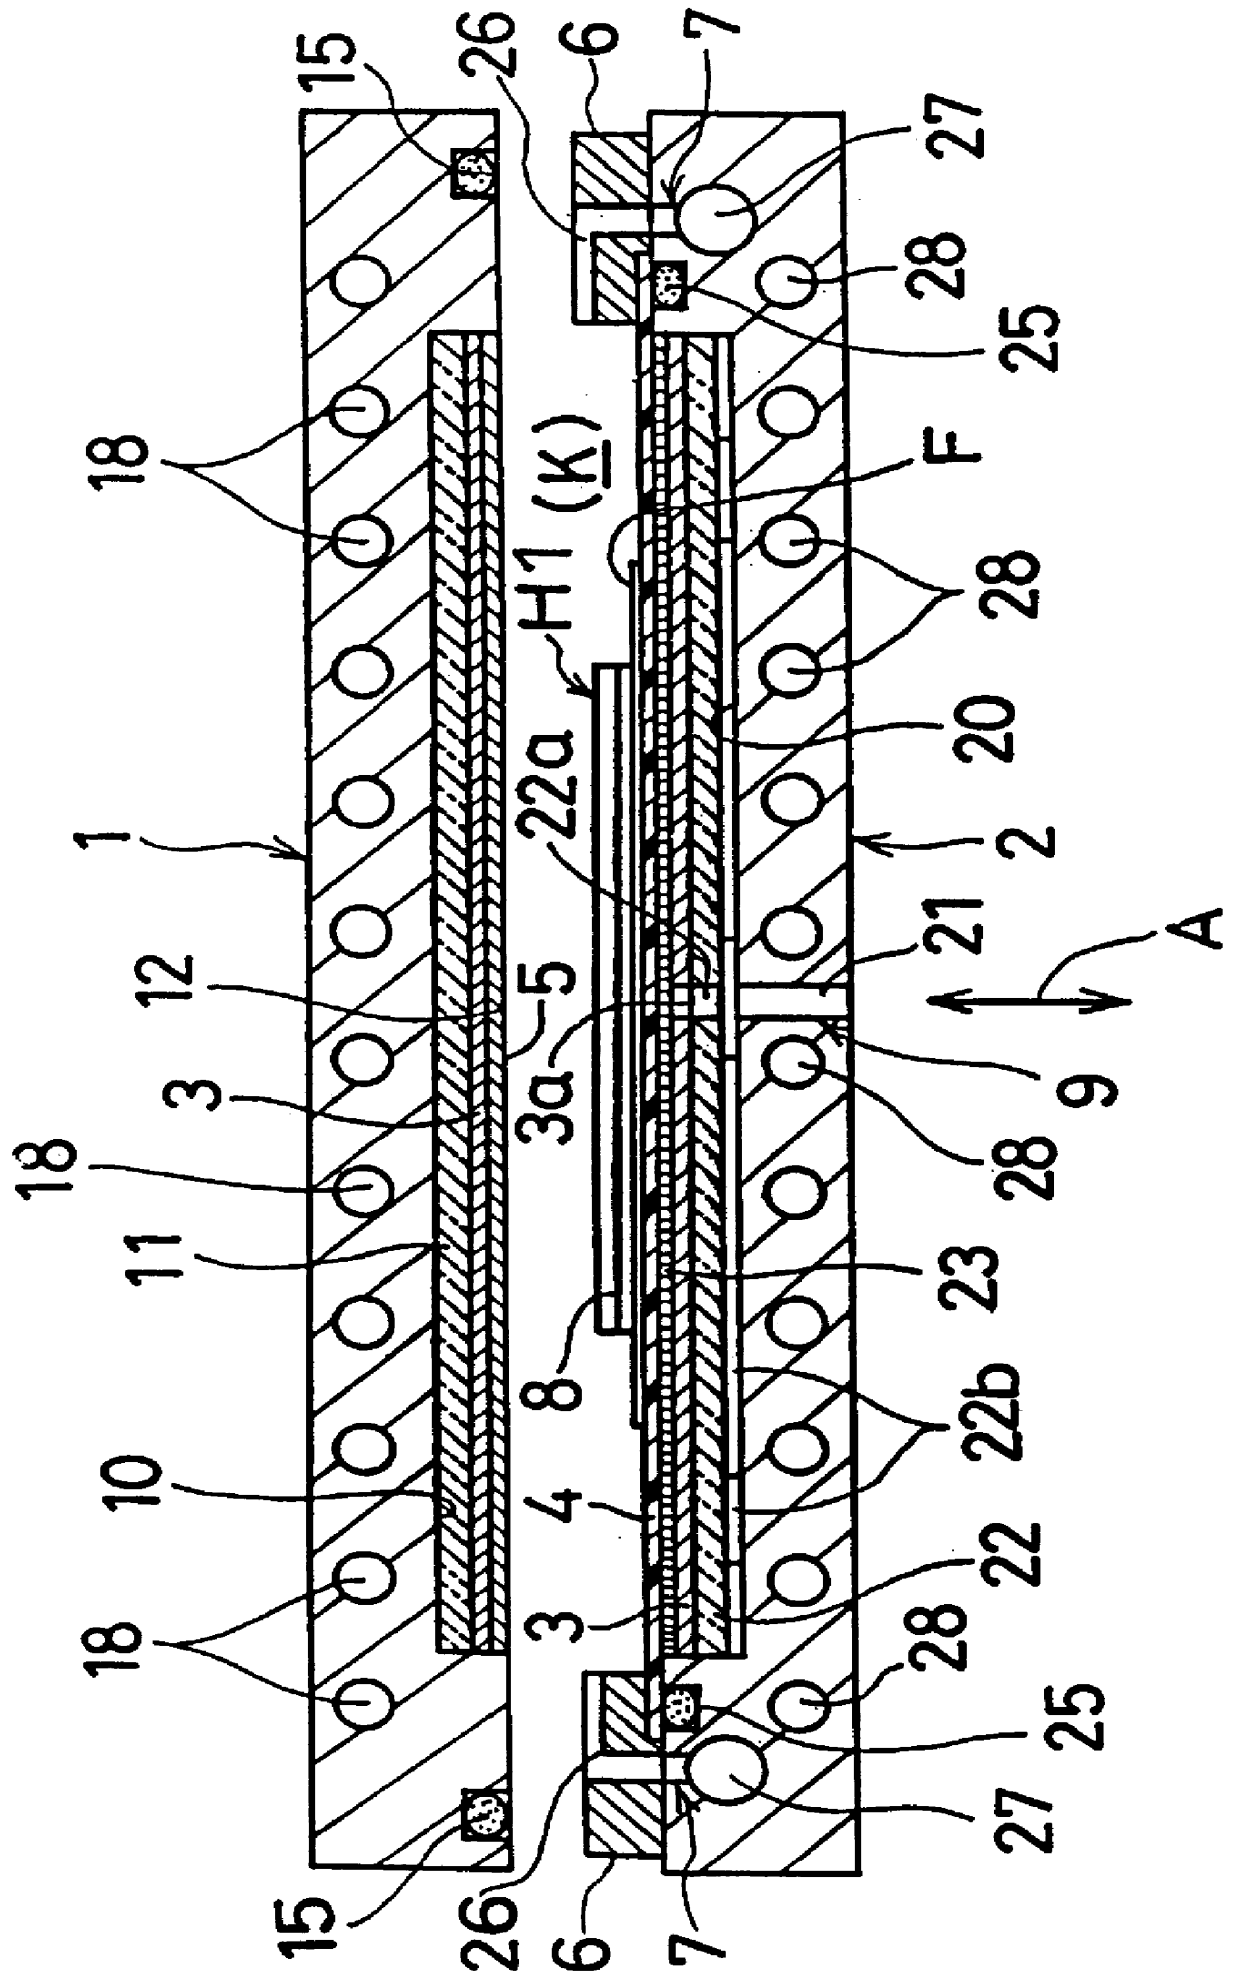 Lamination molding method and an apparatus thereof